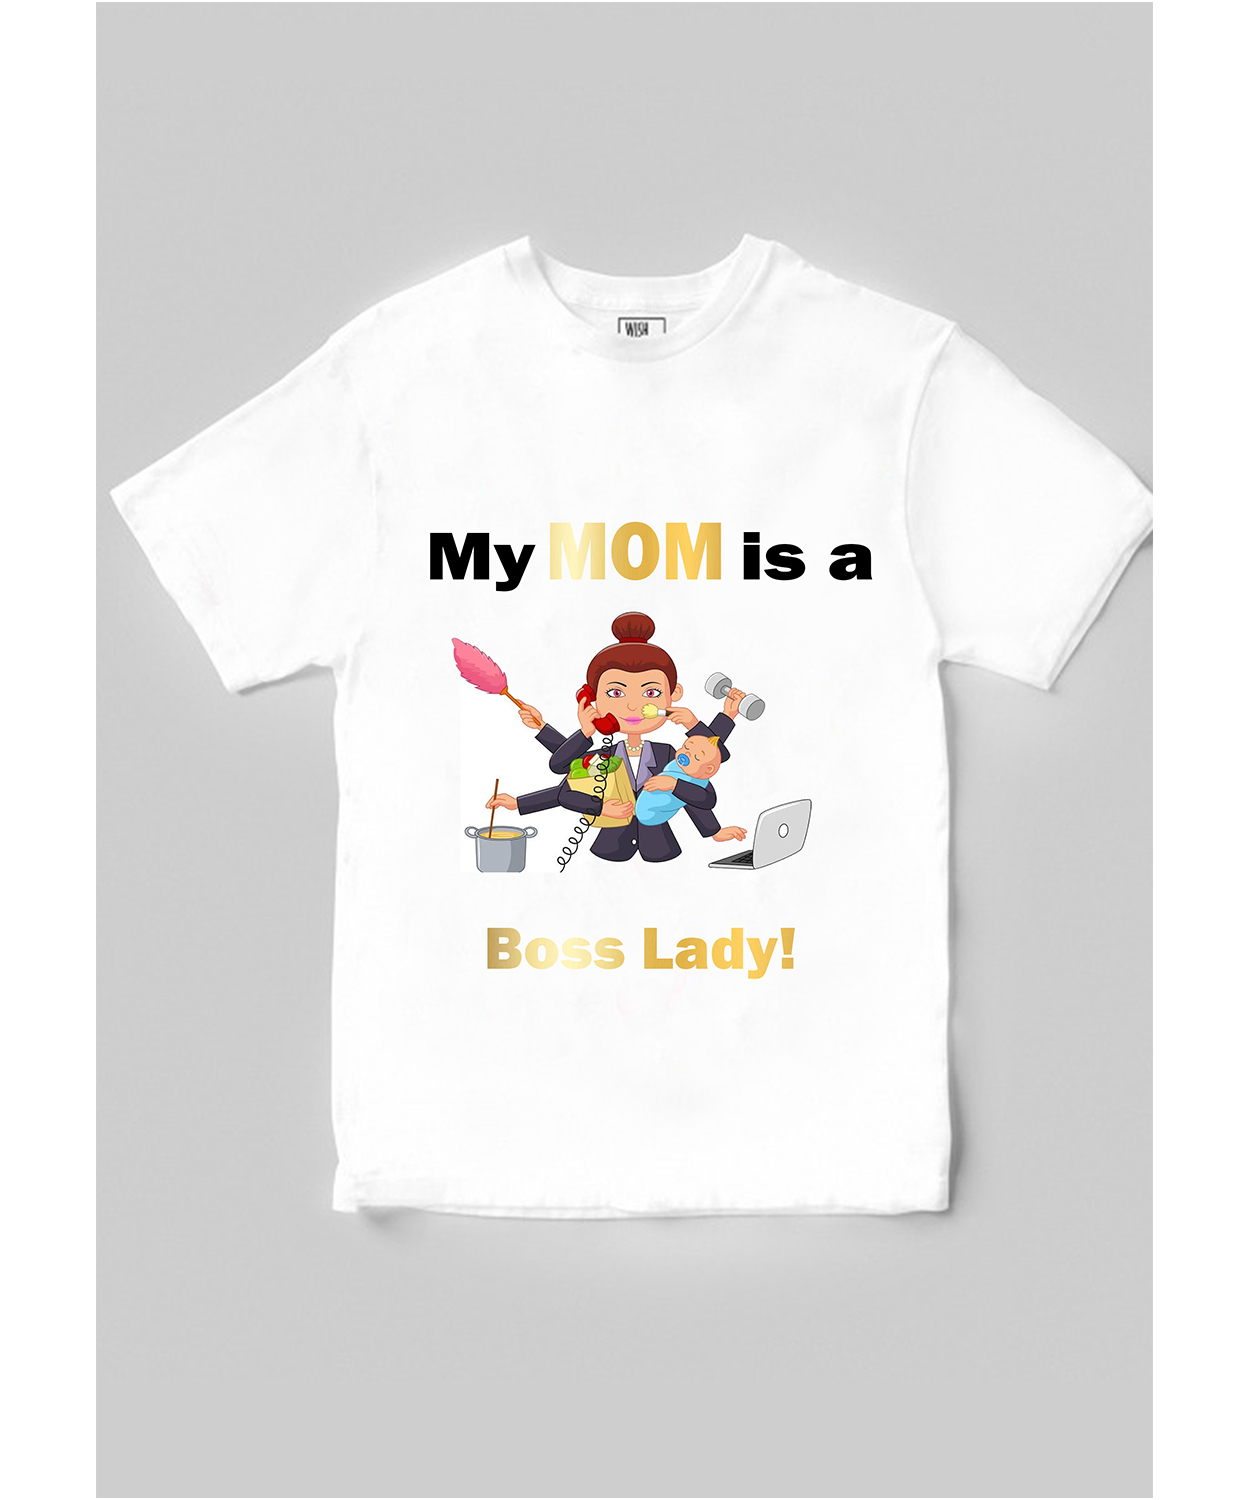 Mom Is a Boss Lady T-shirt